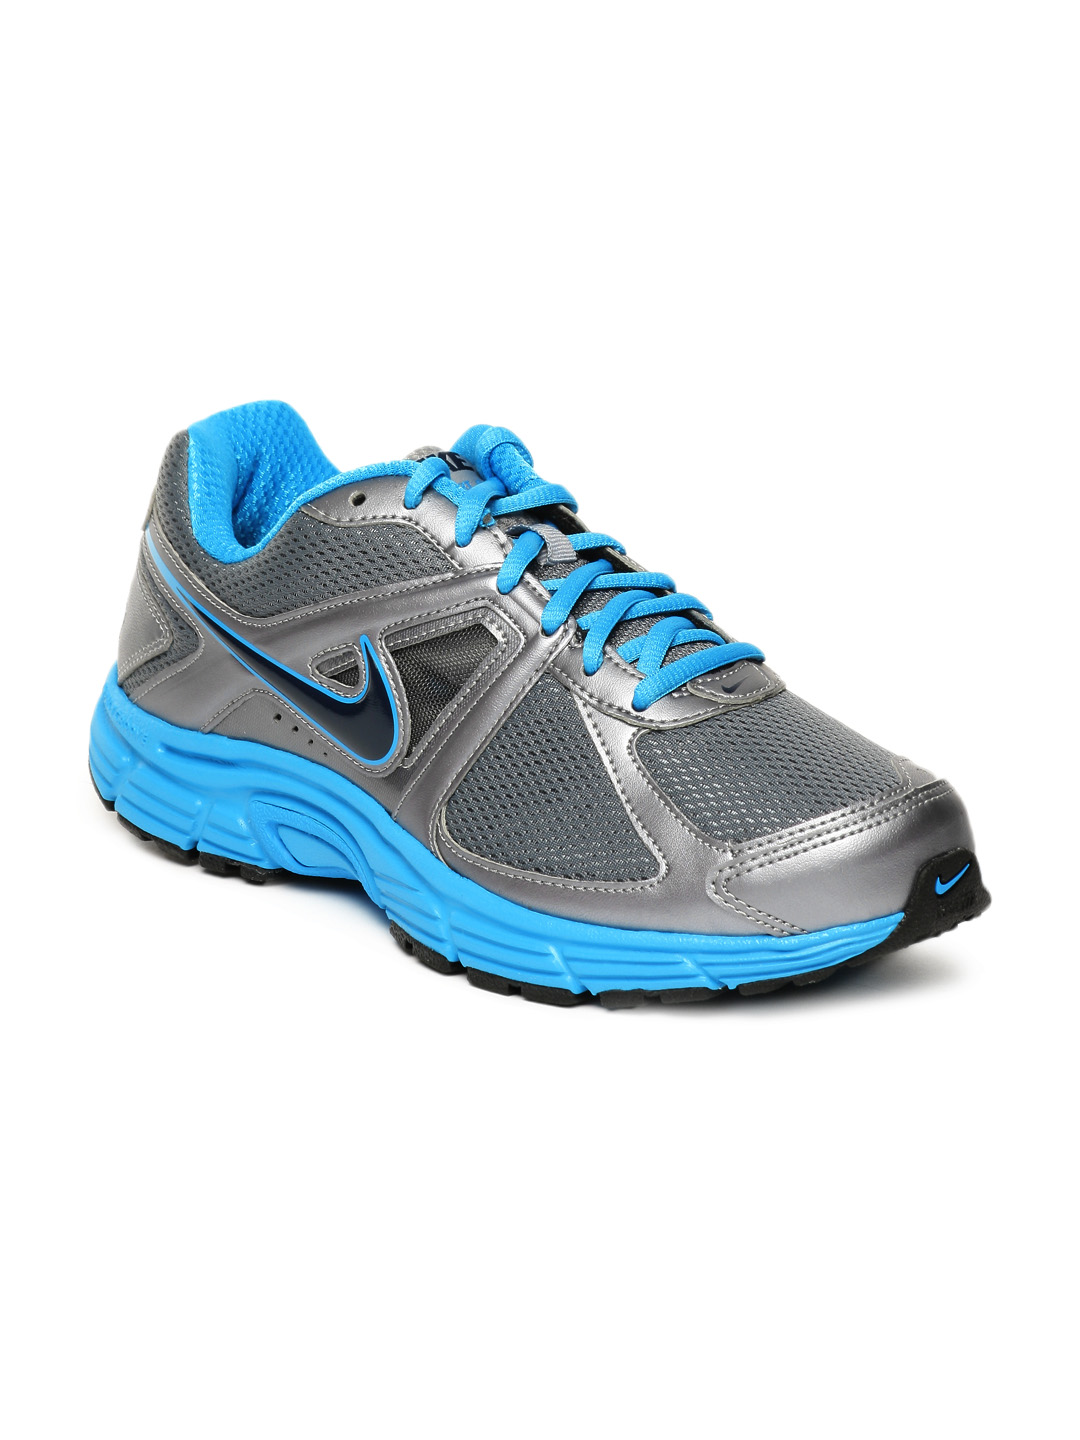 Download this Sports Shoes Bcbededd Images Mini picture